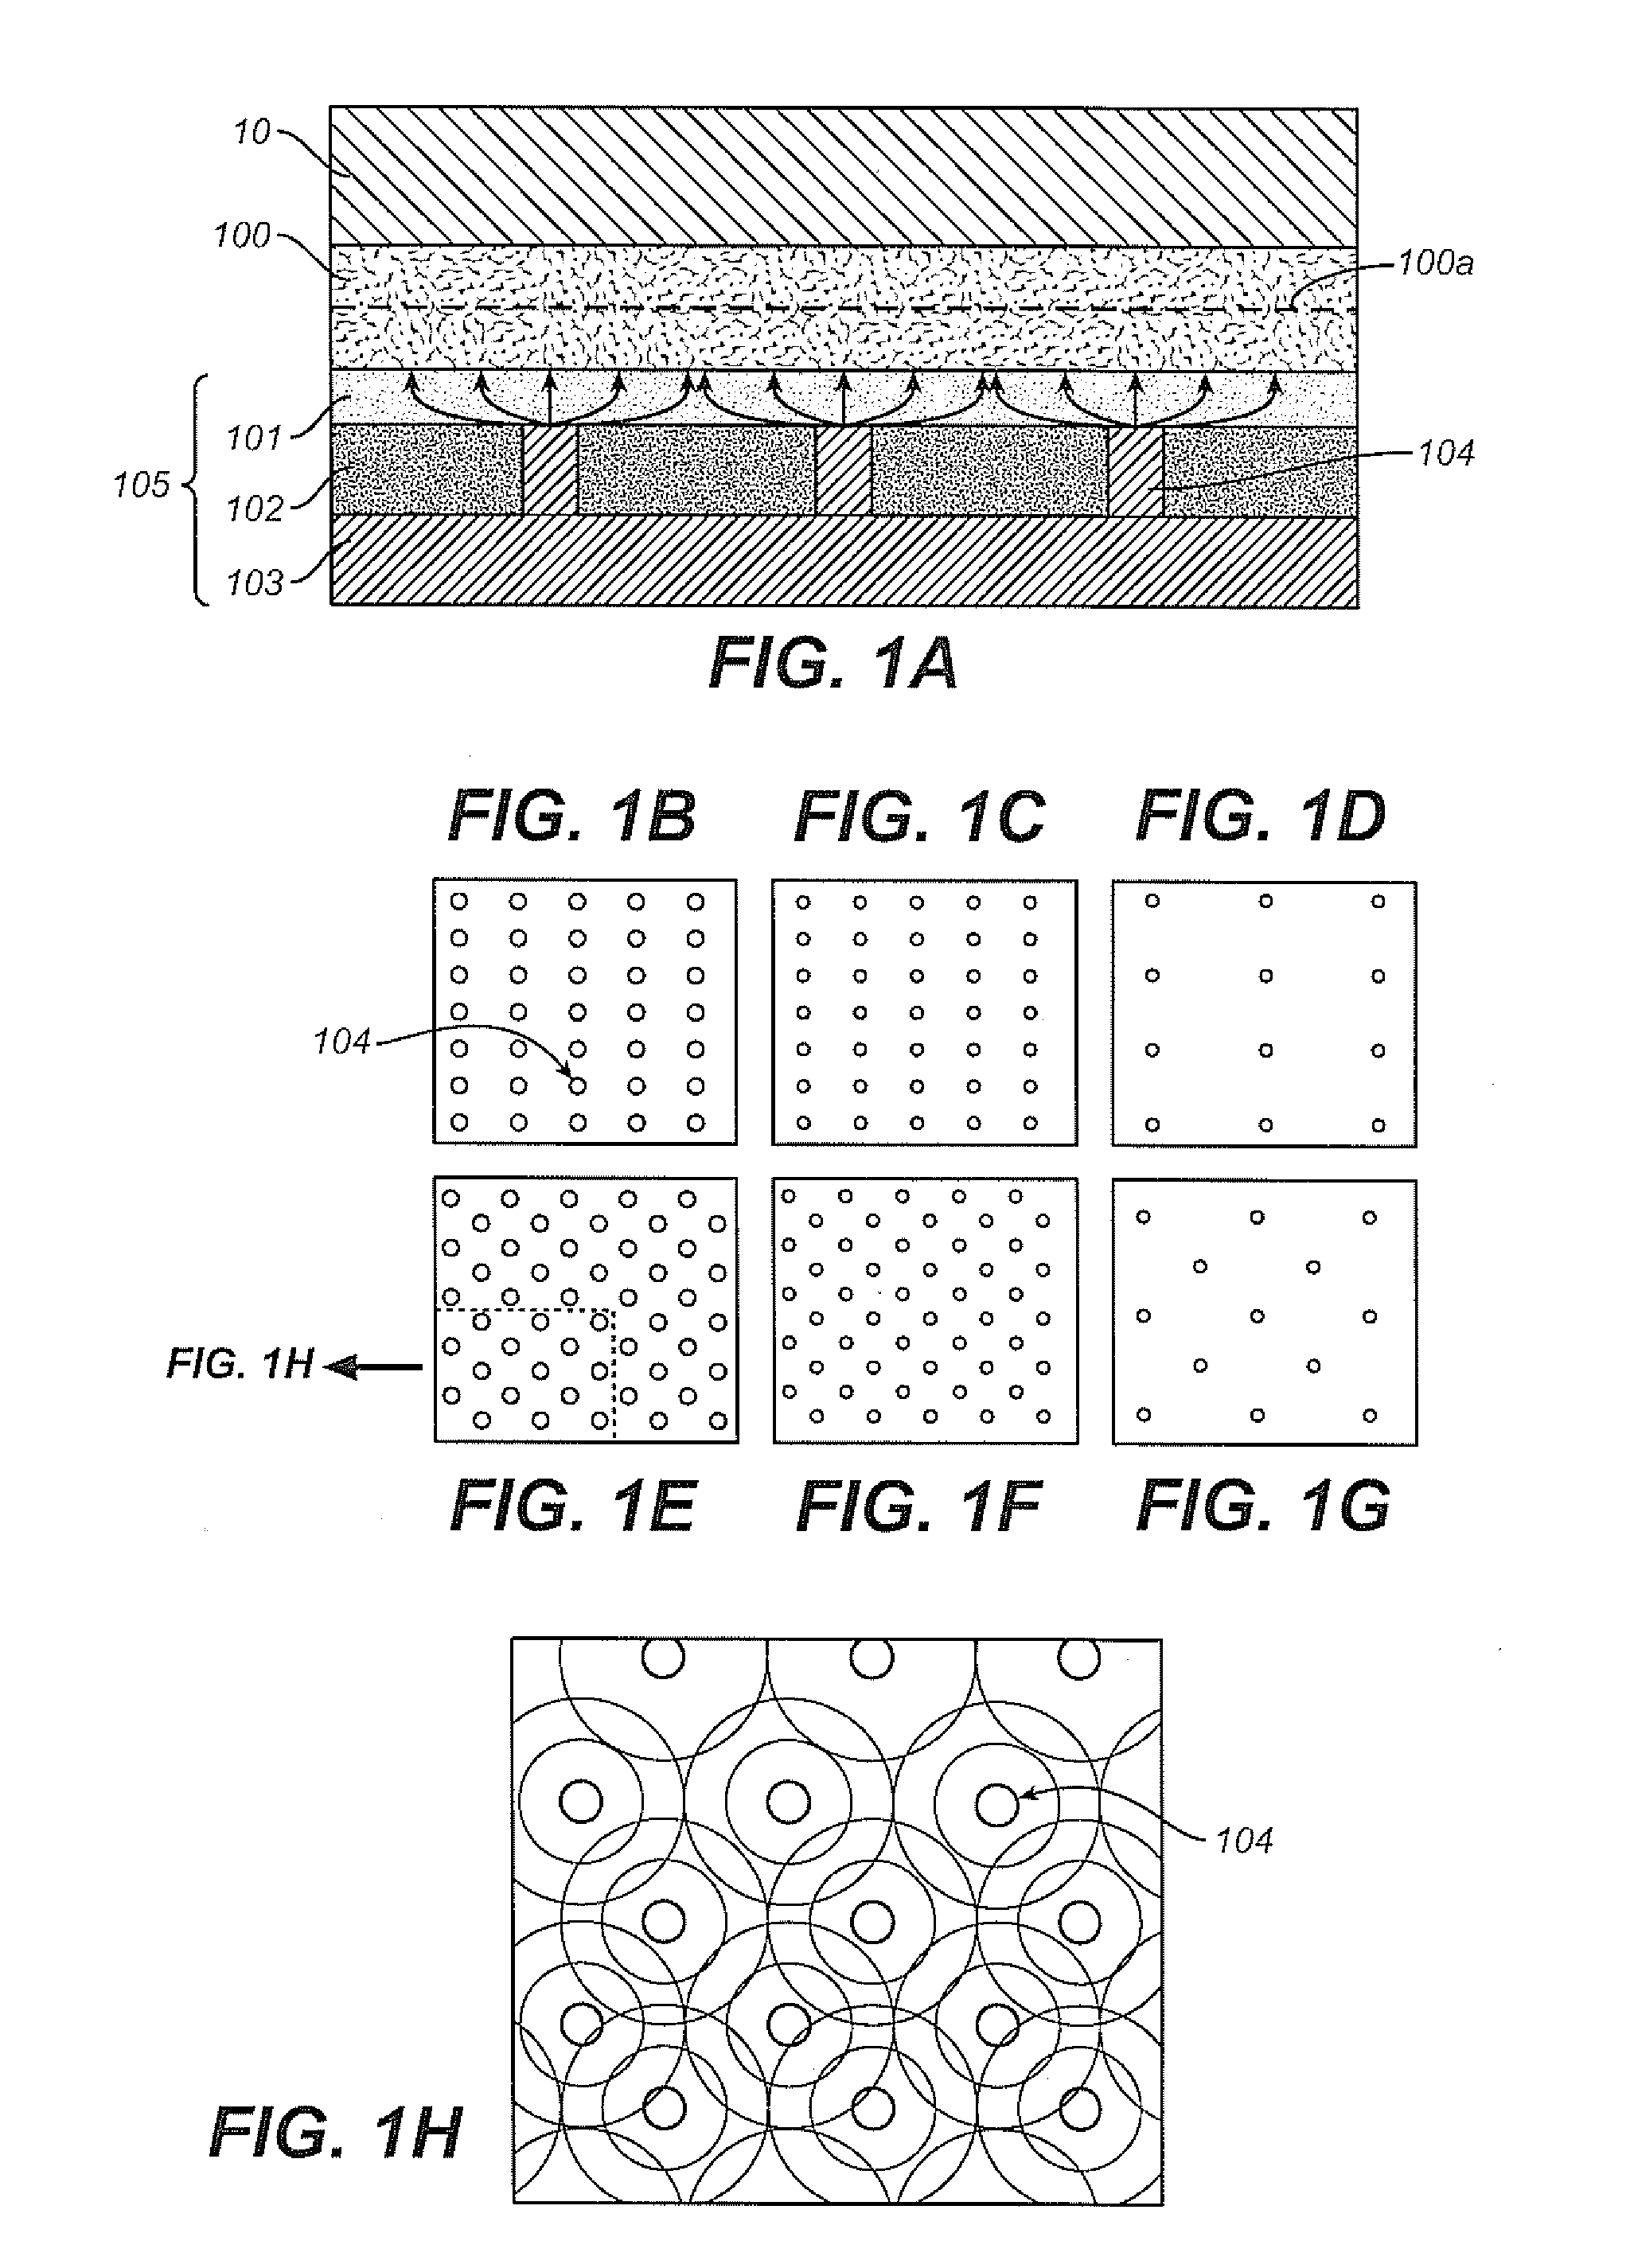 System for High Efficiency Solid-State Light Emissions and Method of Manufacture